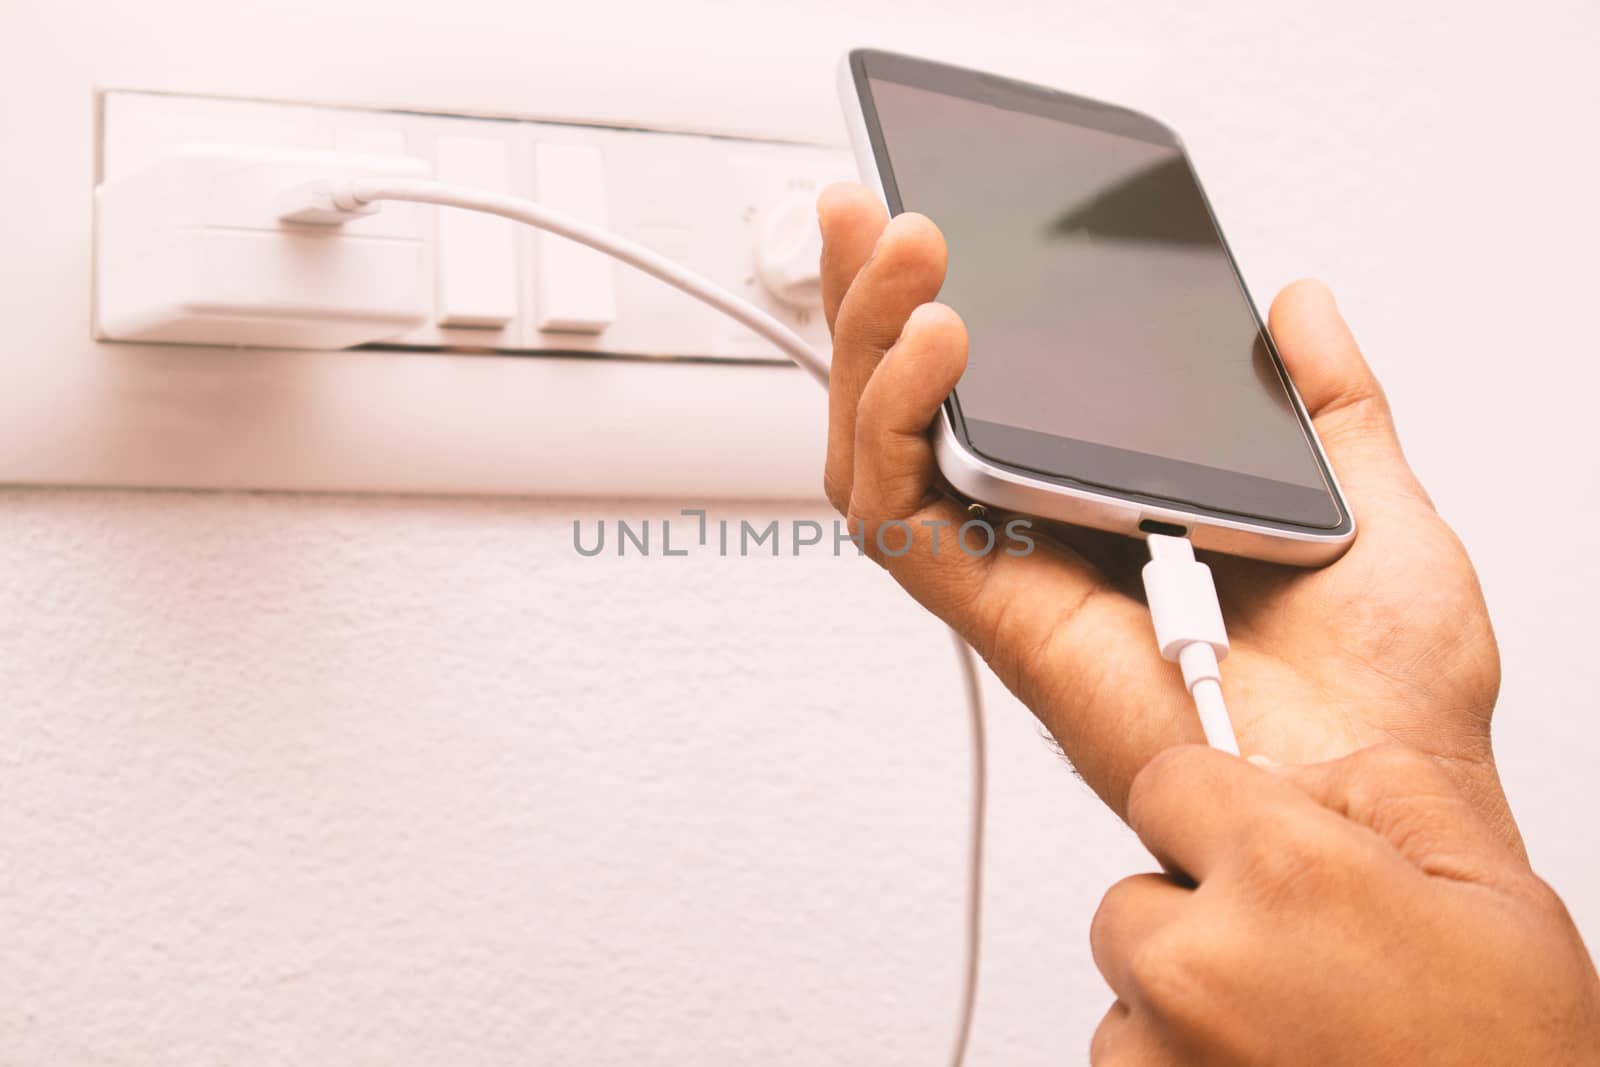 Maski, India 18,January 2020 - Hand holding smartphone and connecting USB type C charger cable to mobile for charging. by lakshmiprasad.maski@gmai.com